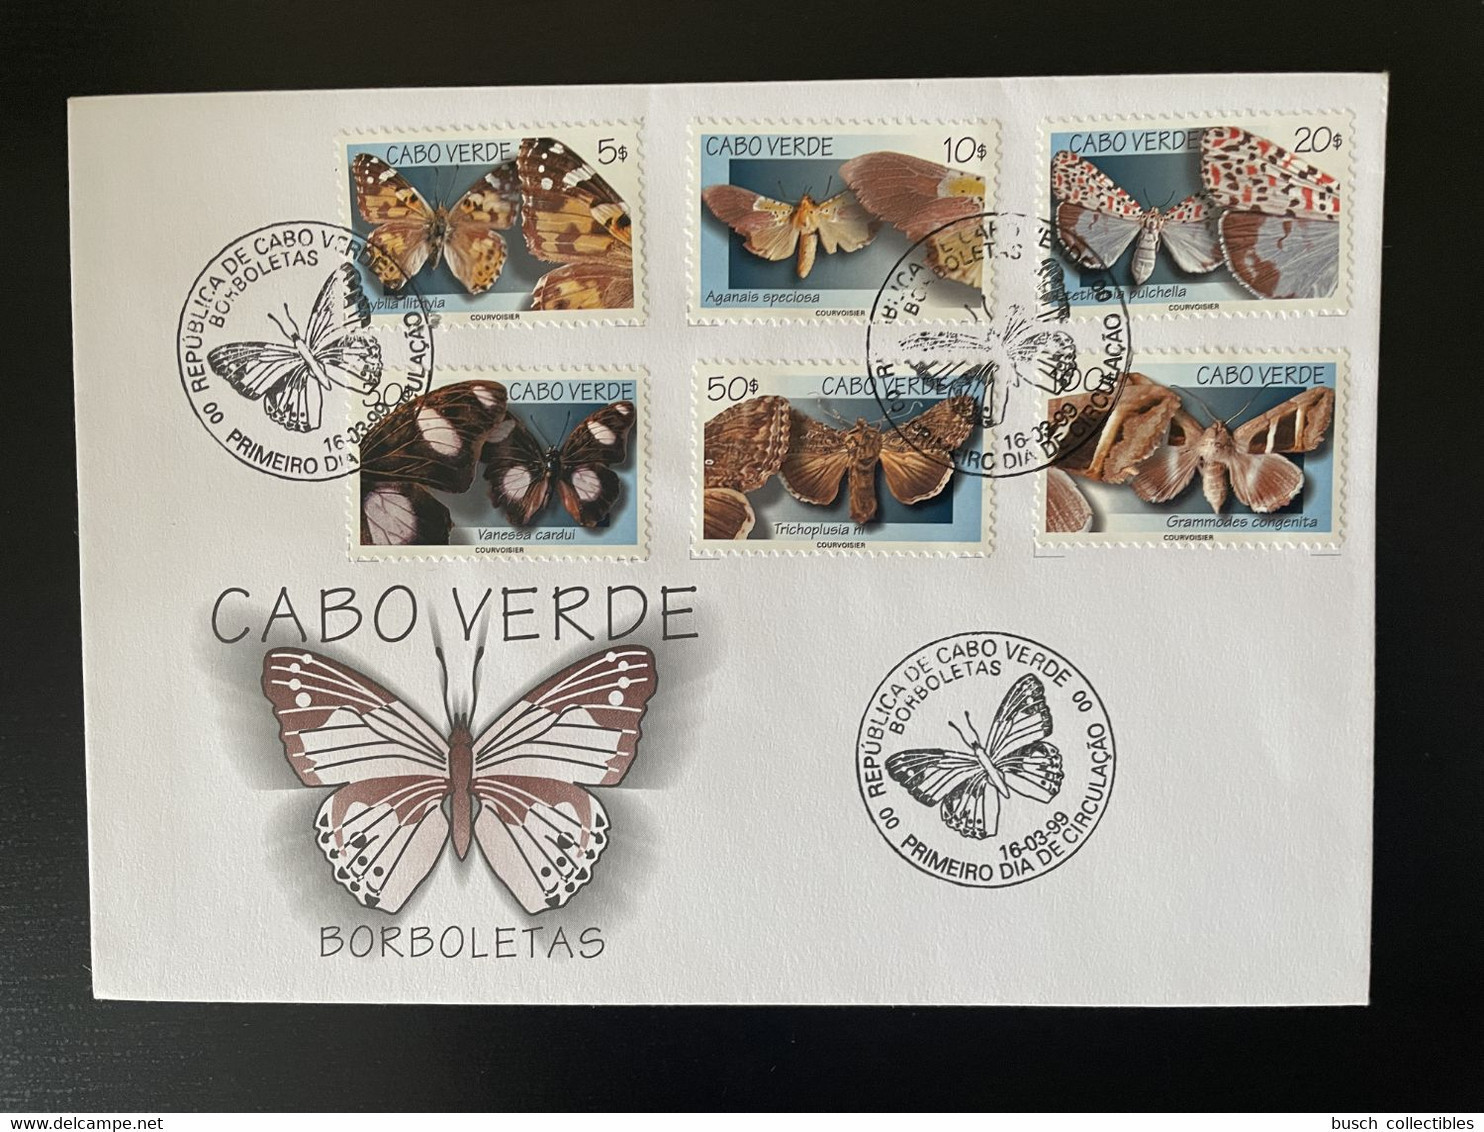 Cape Verde Cabo Verde 1999 Mi. 753 - 758 FDC Papillons Borboletas Schmetterling Butterflies Insectes Insects Insekte - Vlinders